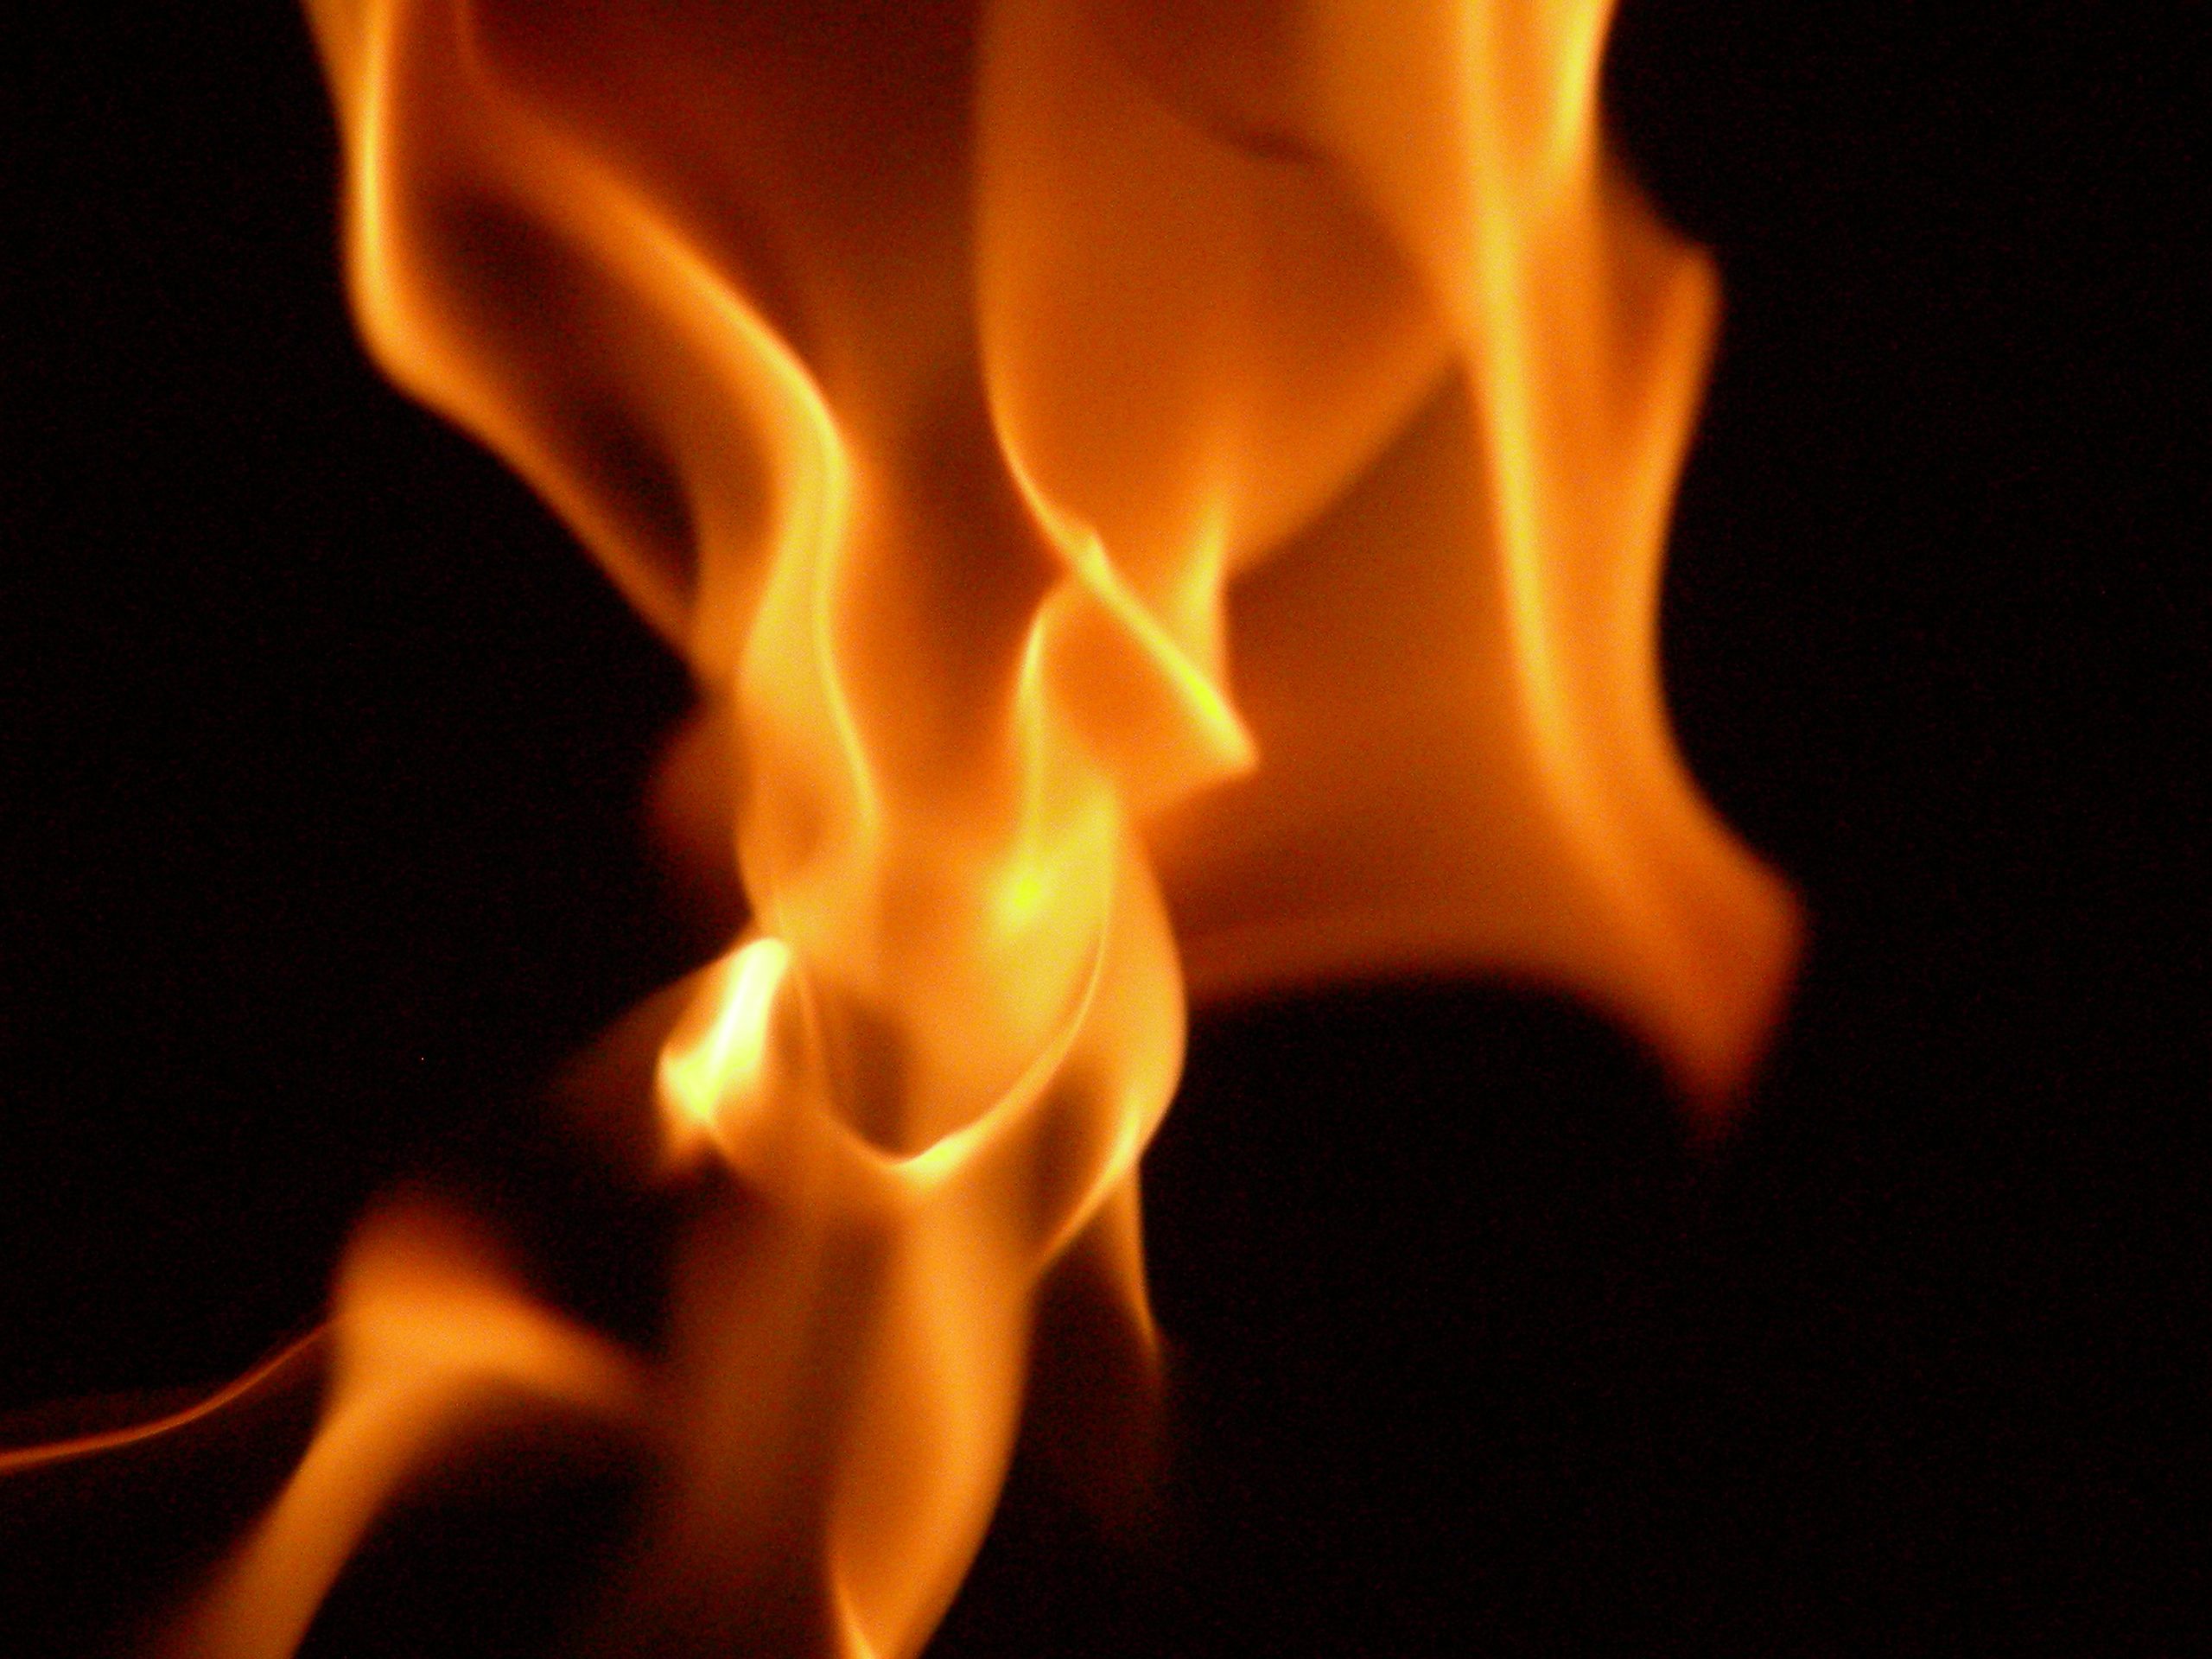 The fire point of a material is different from the ignition point.